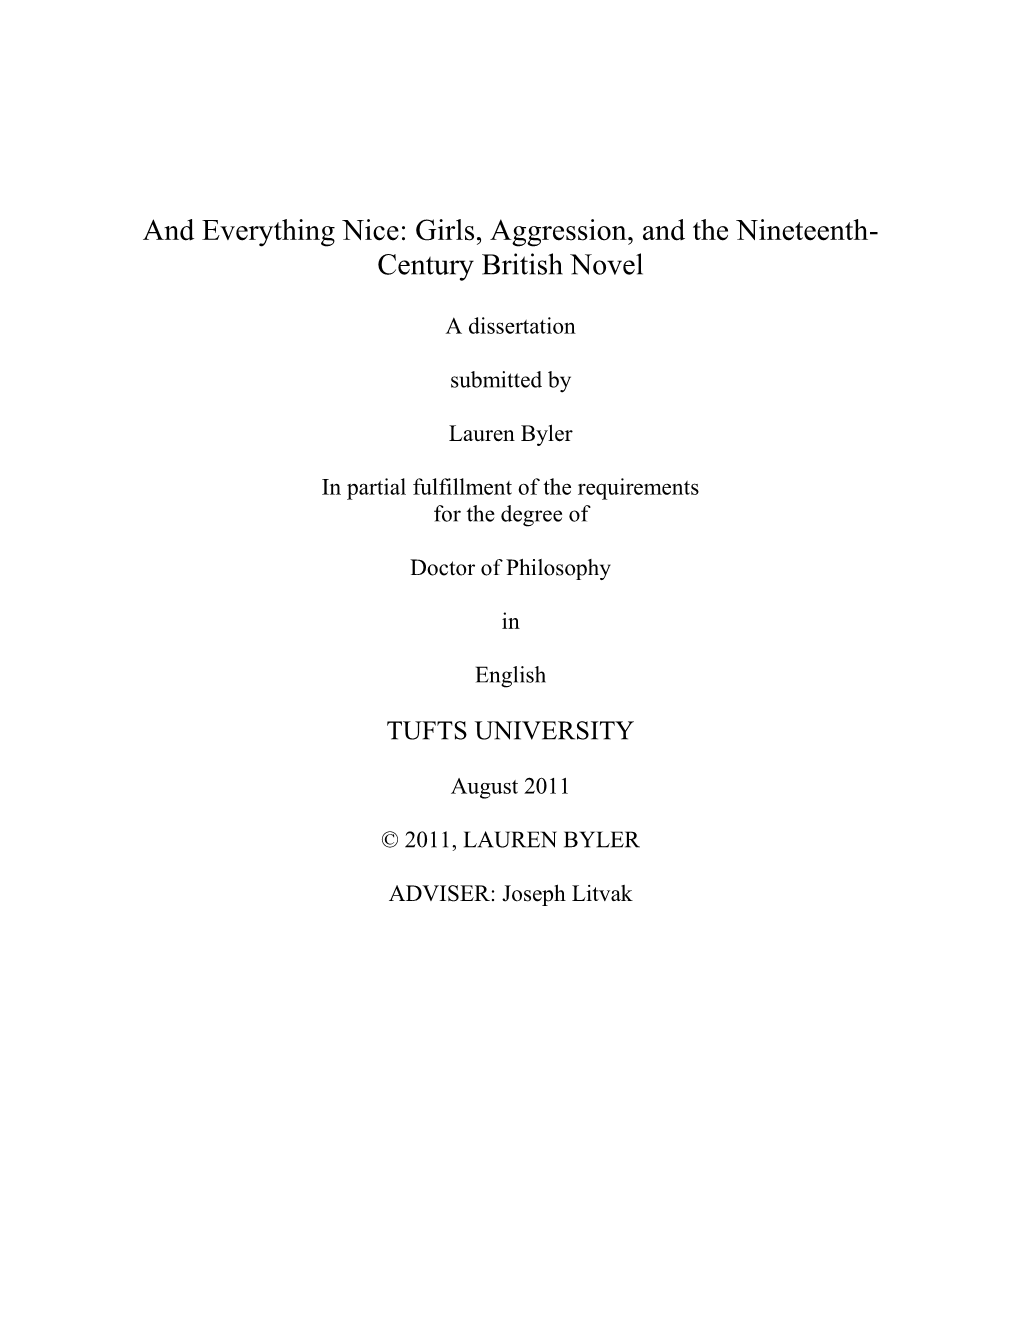 And Everything Nice: Girls, Aggression, and the Nineteenth- Century British Novel